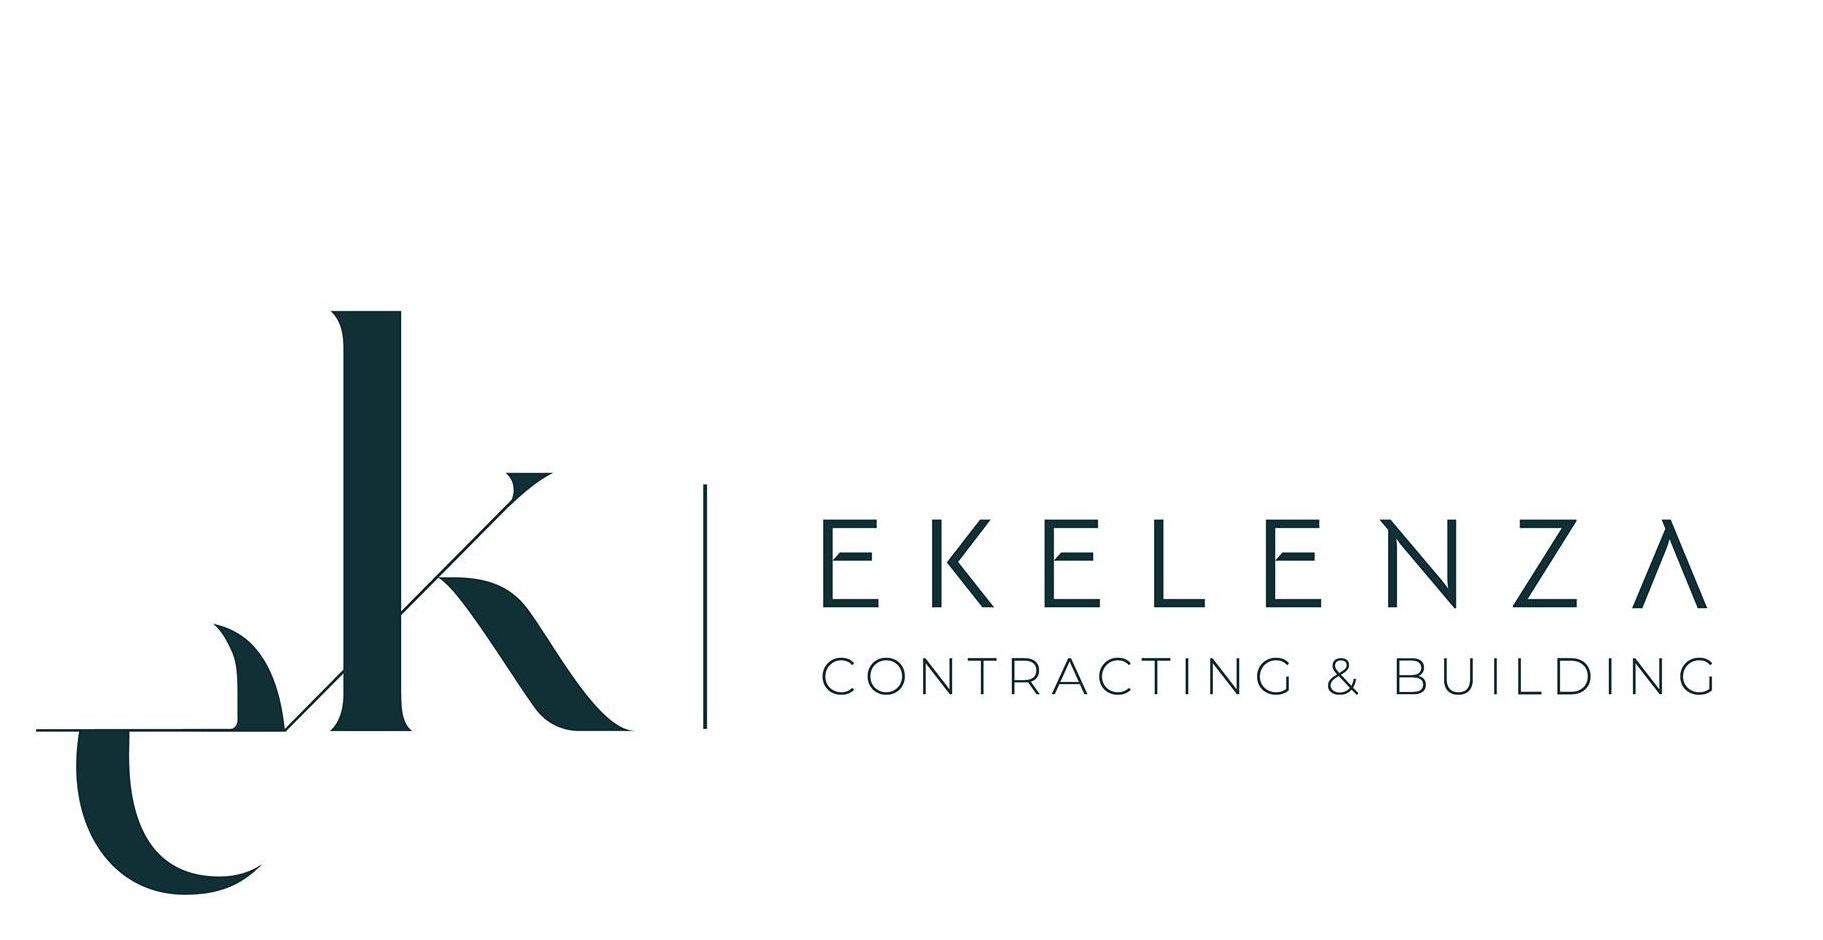 Ekelenza co for Contracting and building